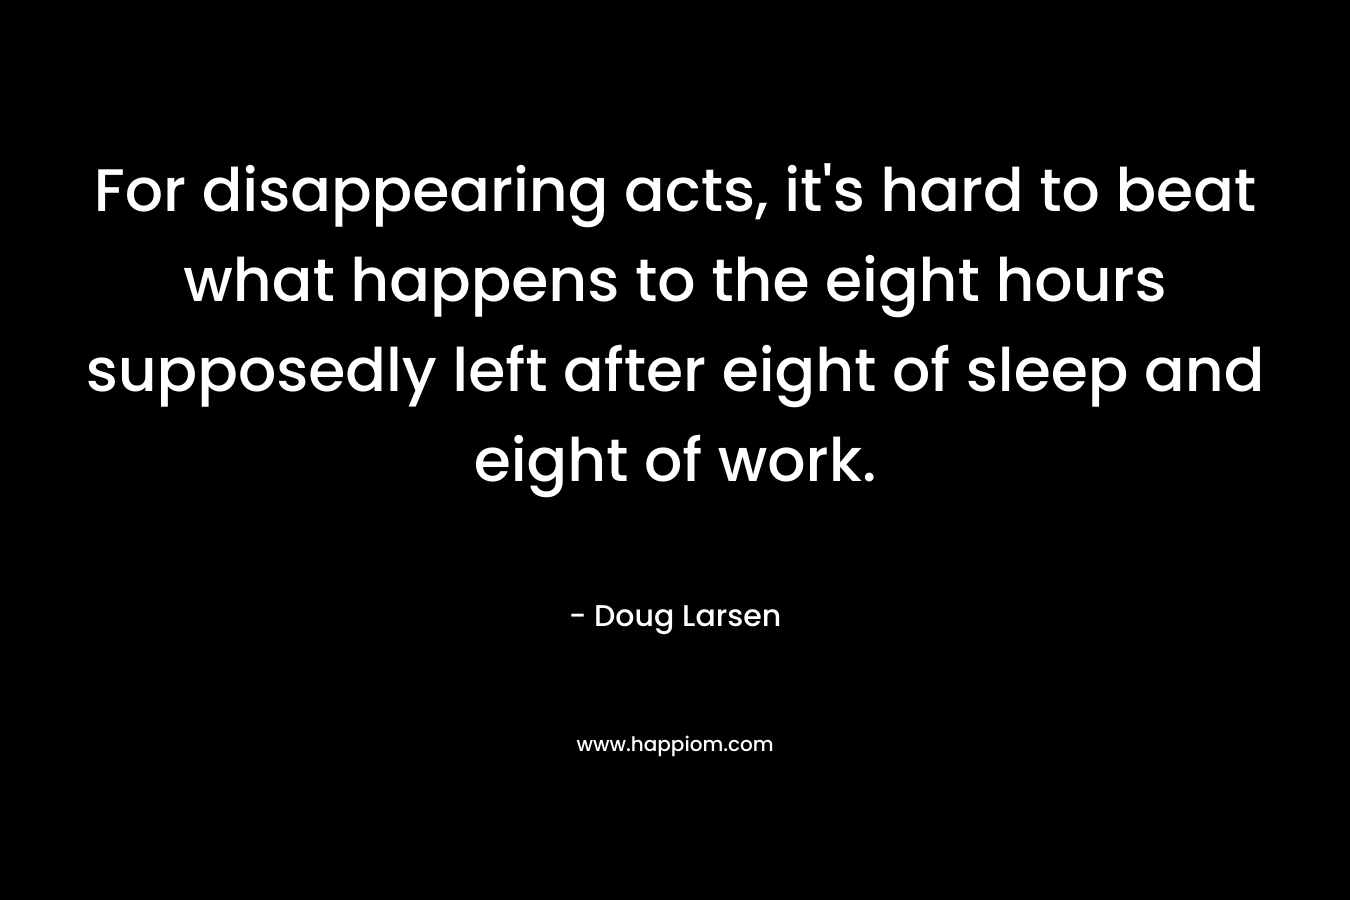 For disappearing acts, it’s hard to beat what happens to the eight hours supposedly left after eight of sleep and eight of work. – Doug Larsen